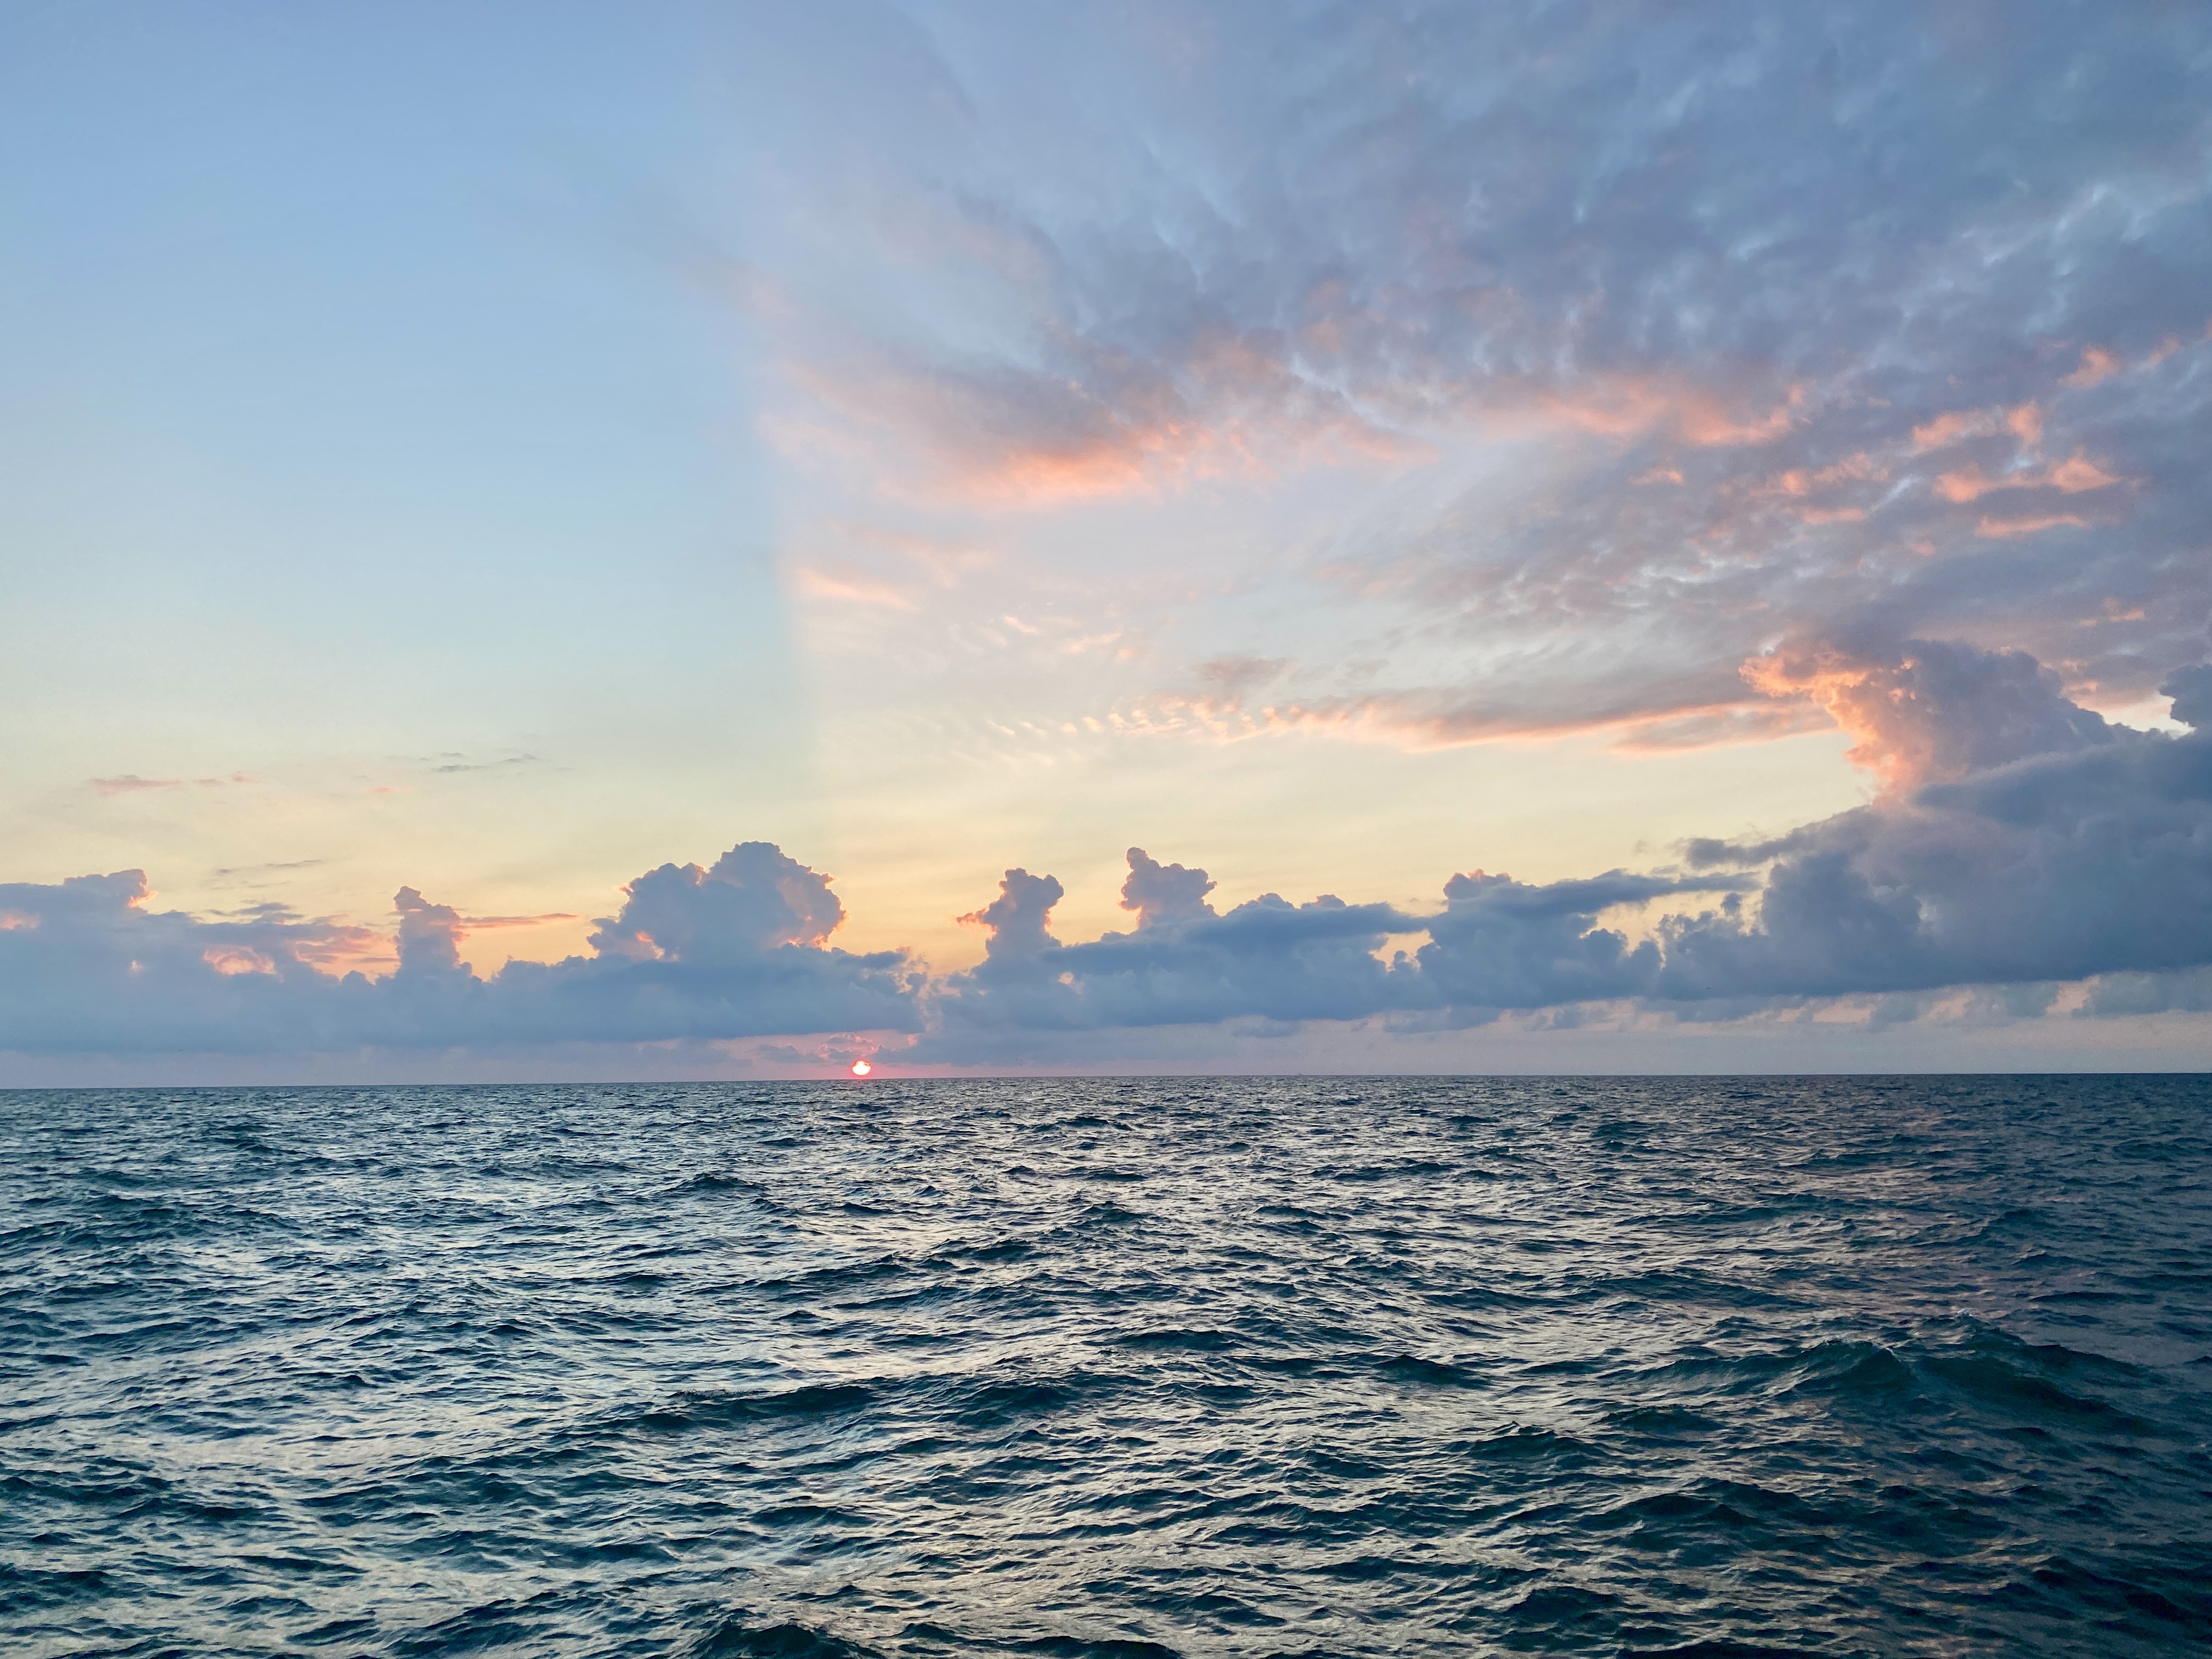 A round red sun rising over a lake horizon, the sky pale blue and swept with yellow and rose clouds, the water surface dark blue with moderate waves